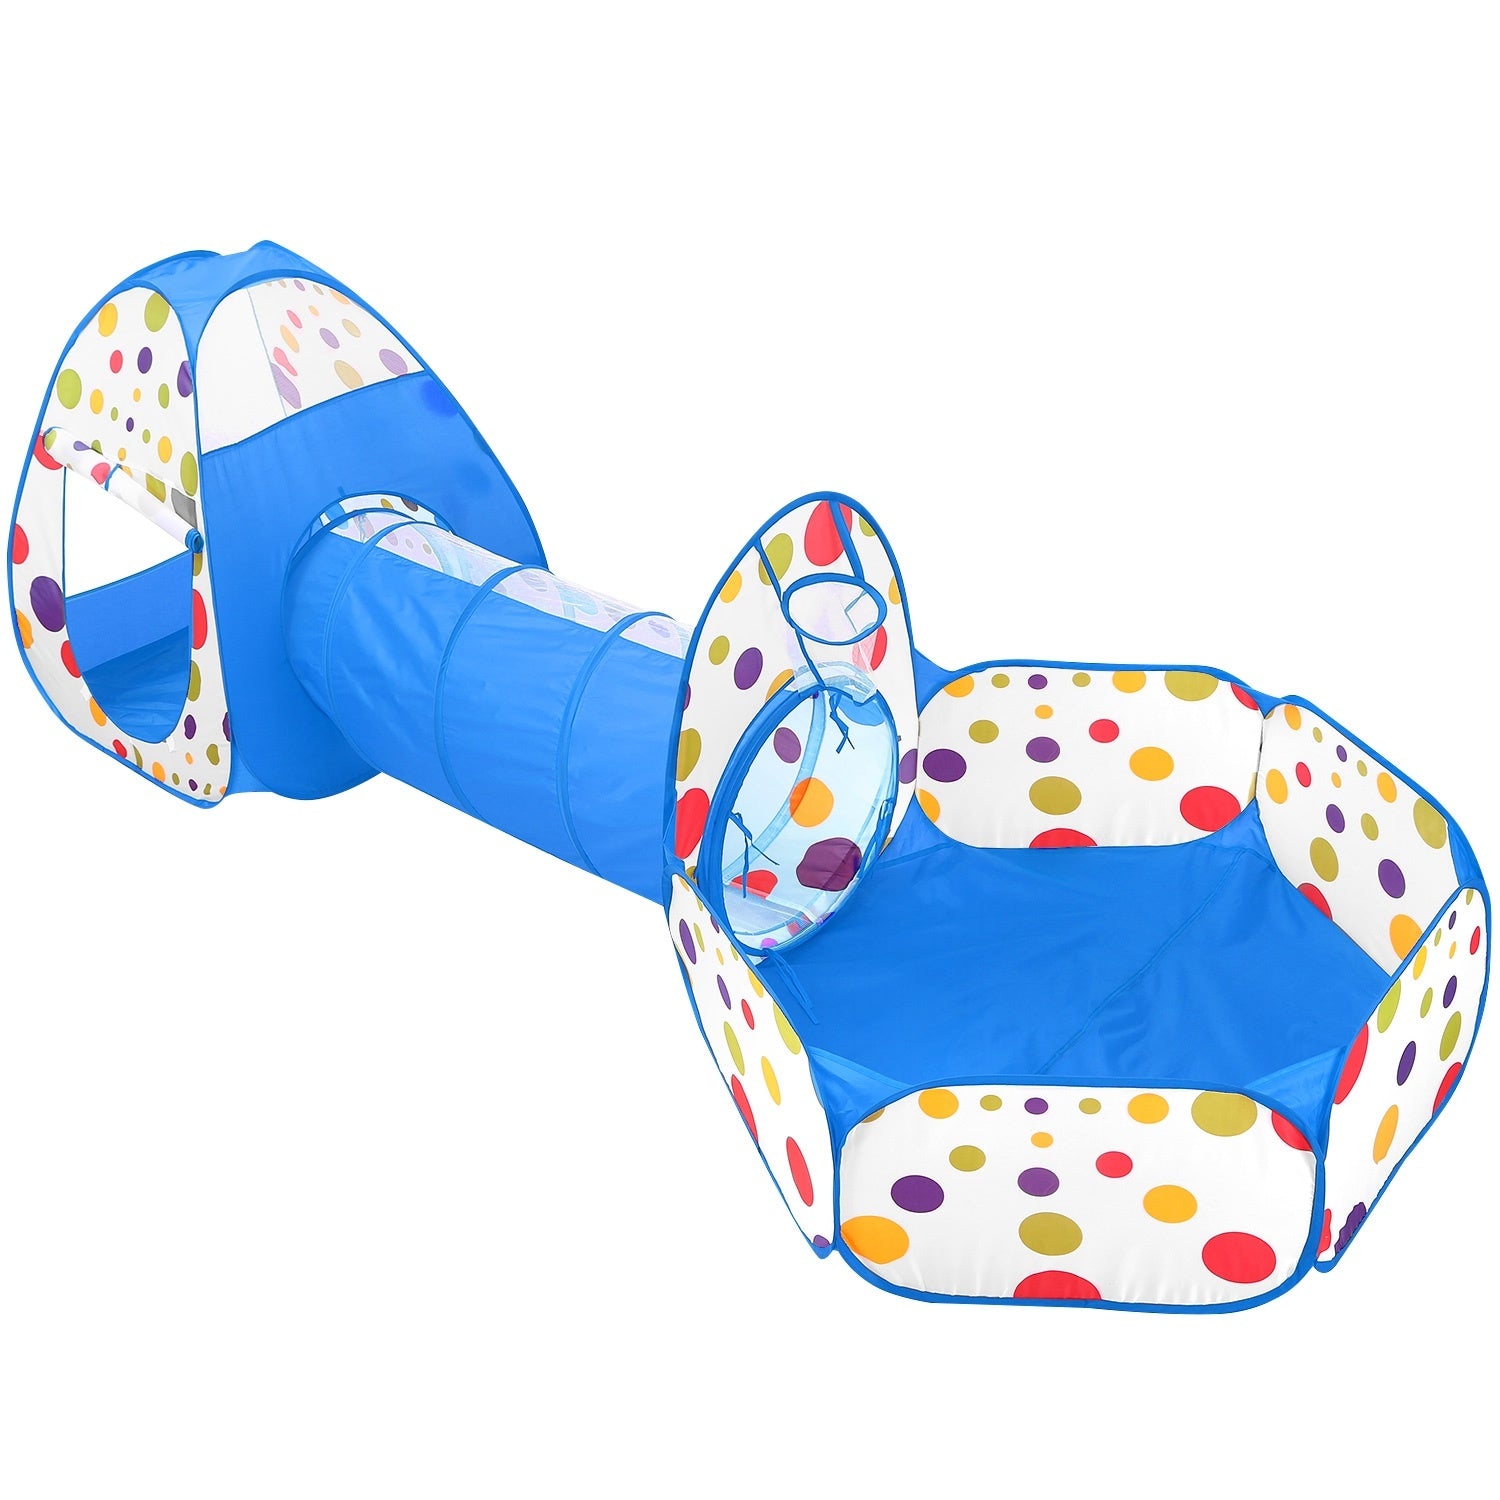 3 In 1 Child Crawl Tunnel Tent Kids Play Tent Ball Pit Set Foldable Children Play House Pop-up Kids Tent